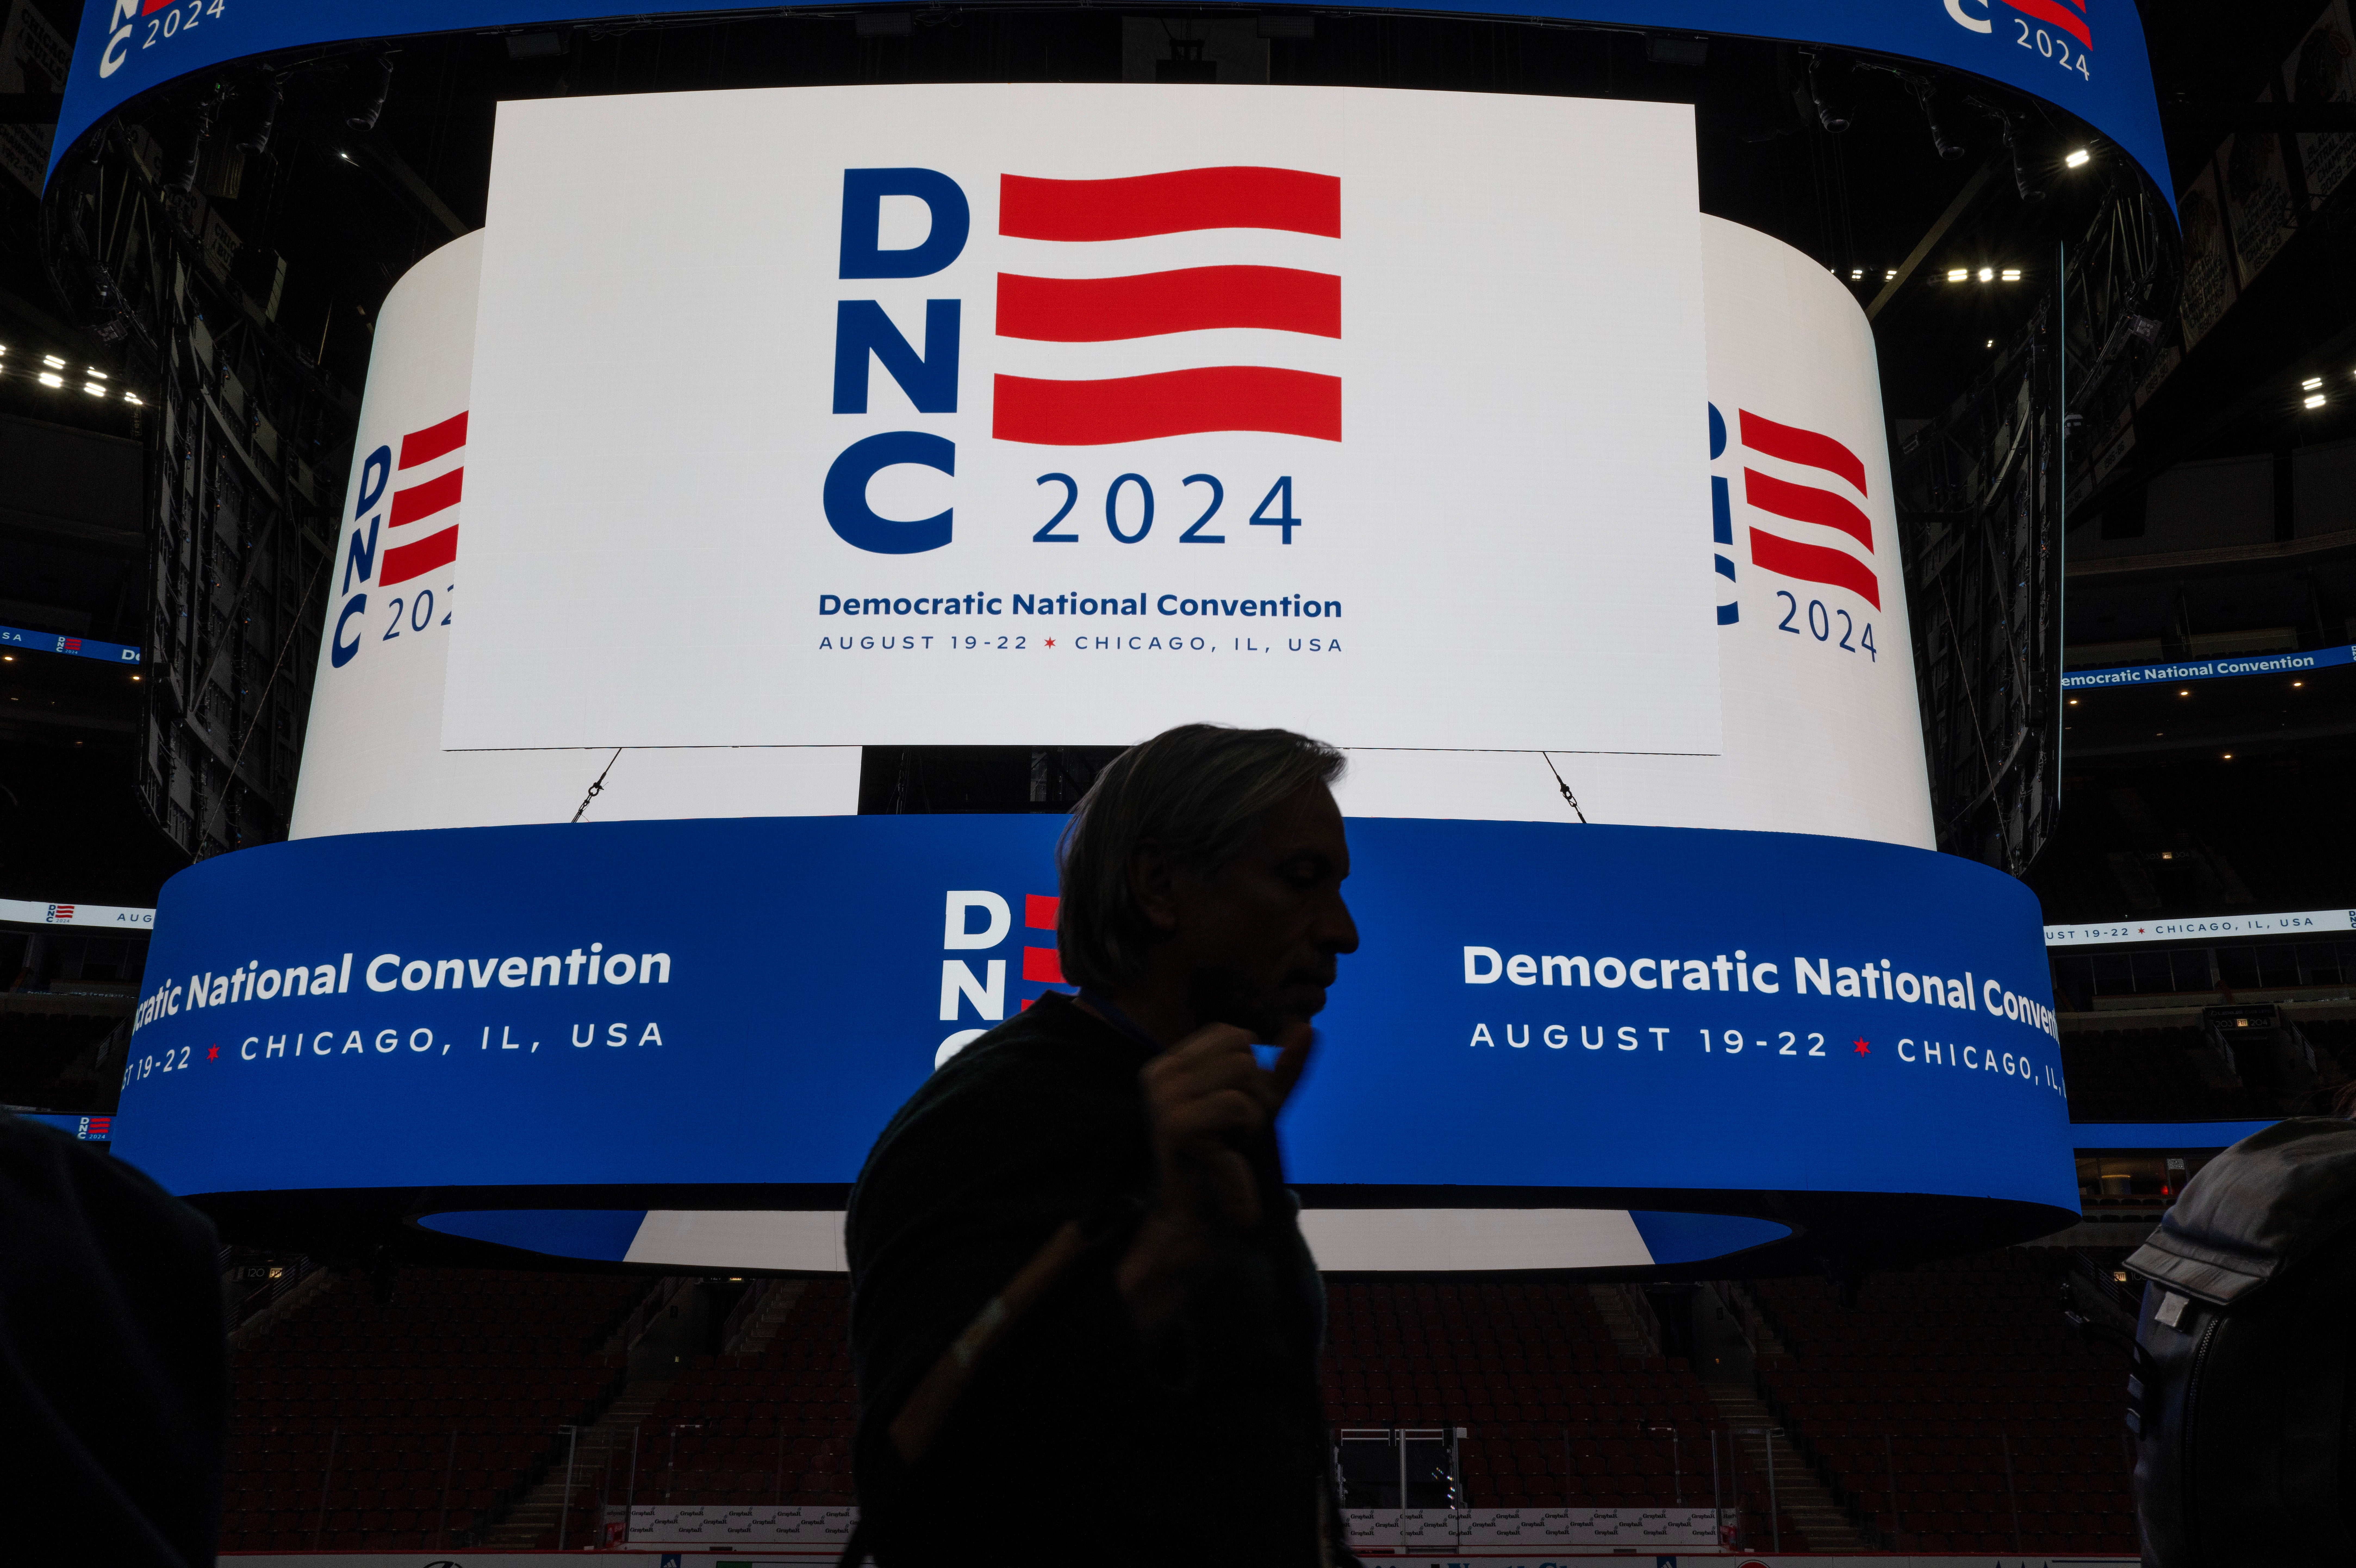 The logo for the Democratic National Convention is displayed on the scoreboard at the United Center during a media walkthrough on January 18, 2024 in Chicago, Illinois. The Democrats haven’t had an open convention since 1968